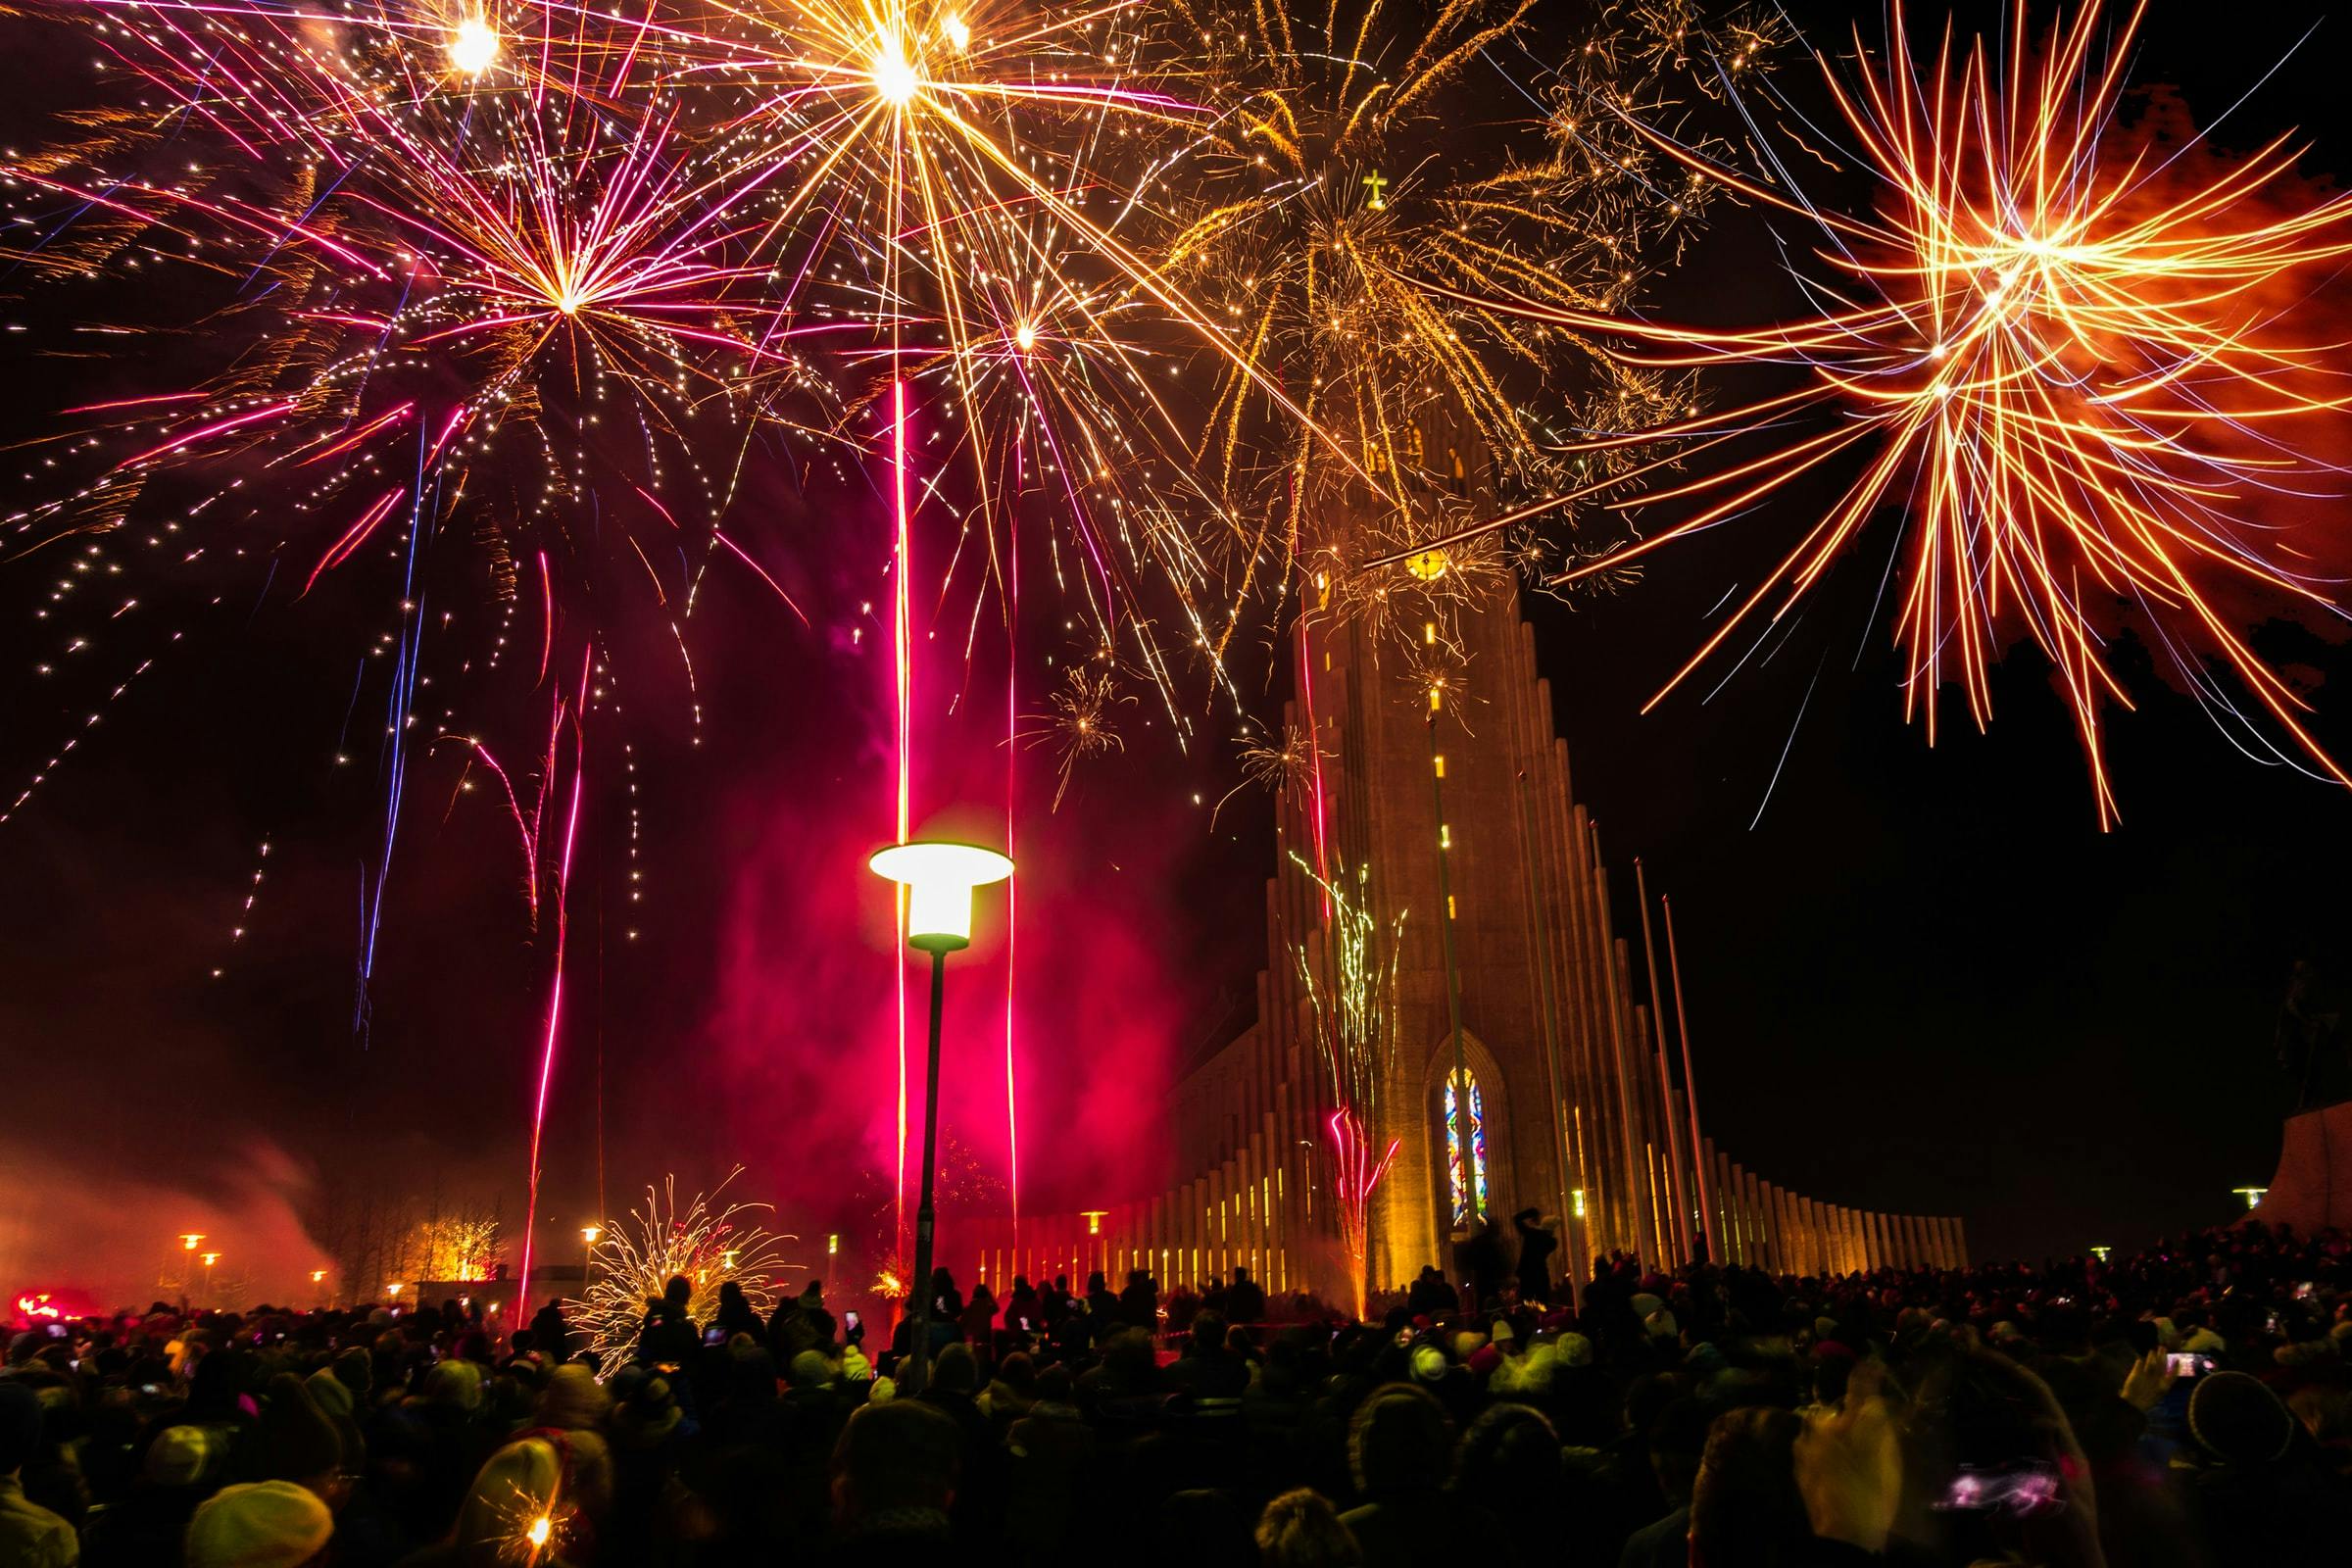 Fireworks in front of the tall Hallgrimskirkja church tower